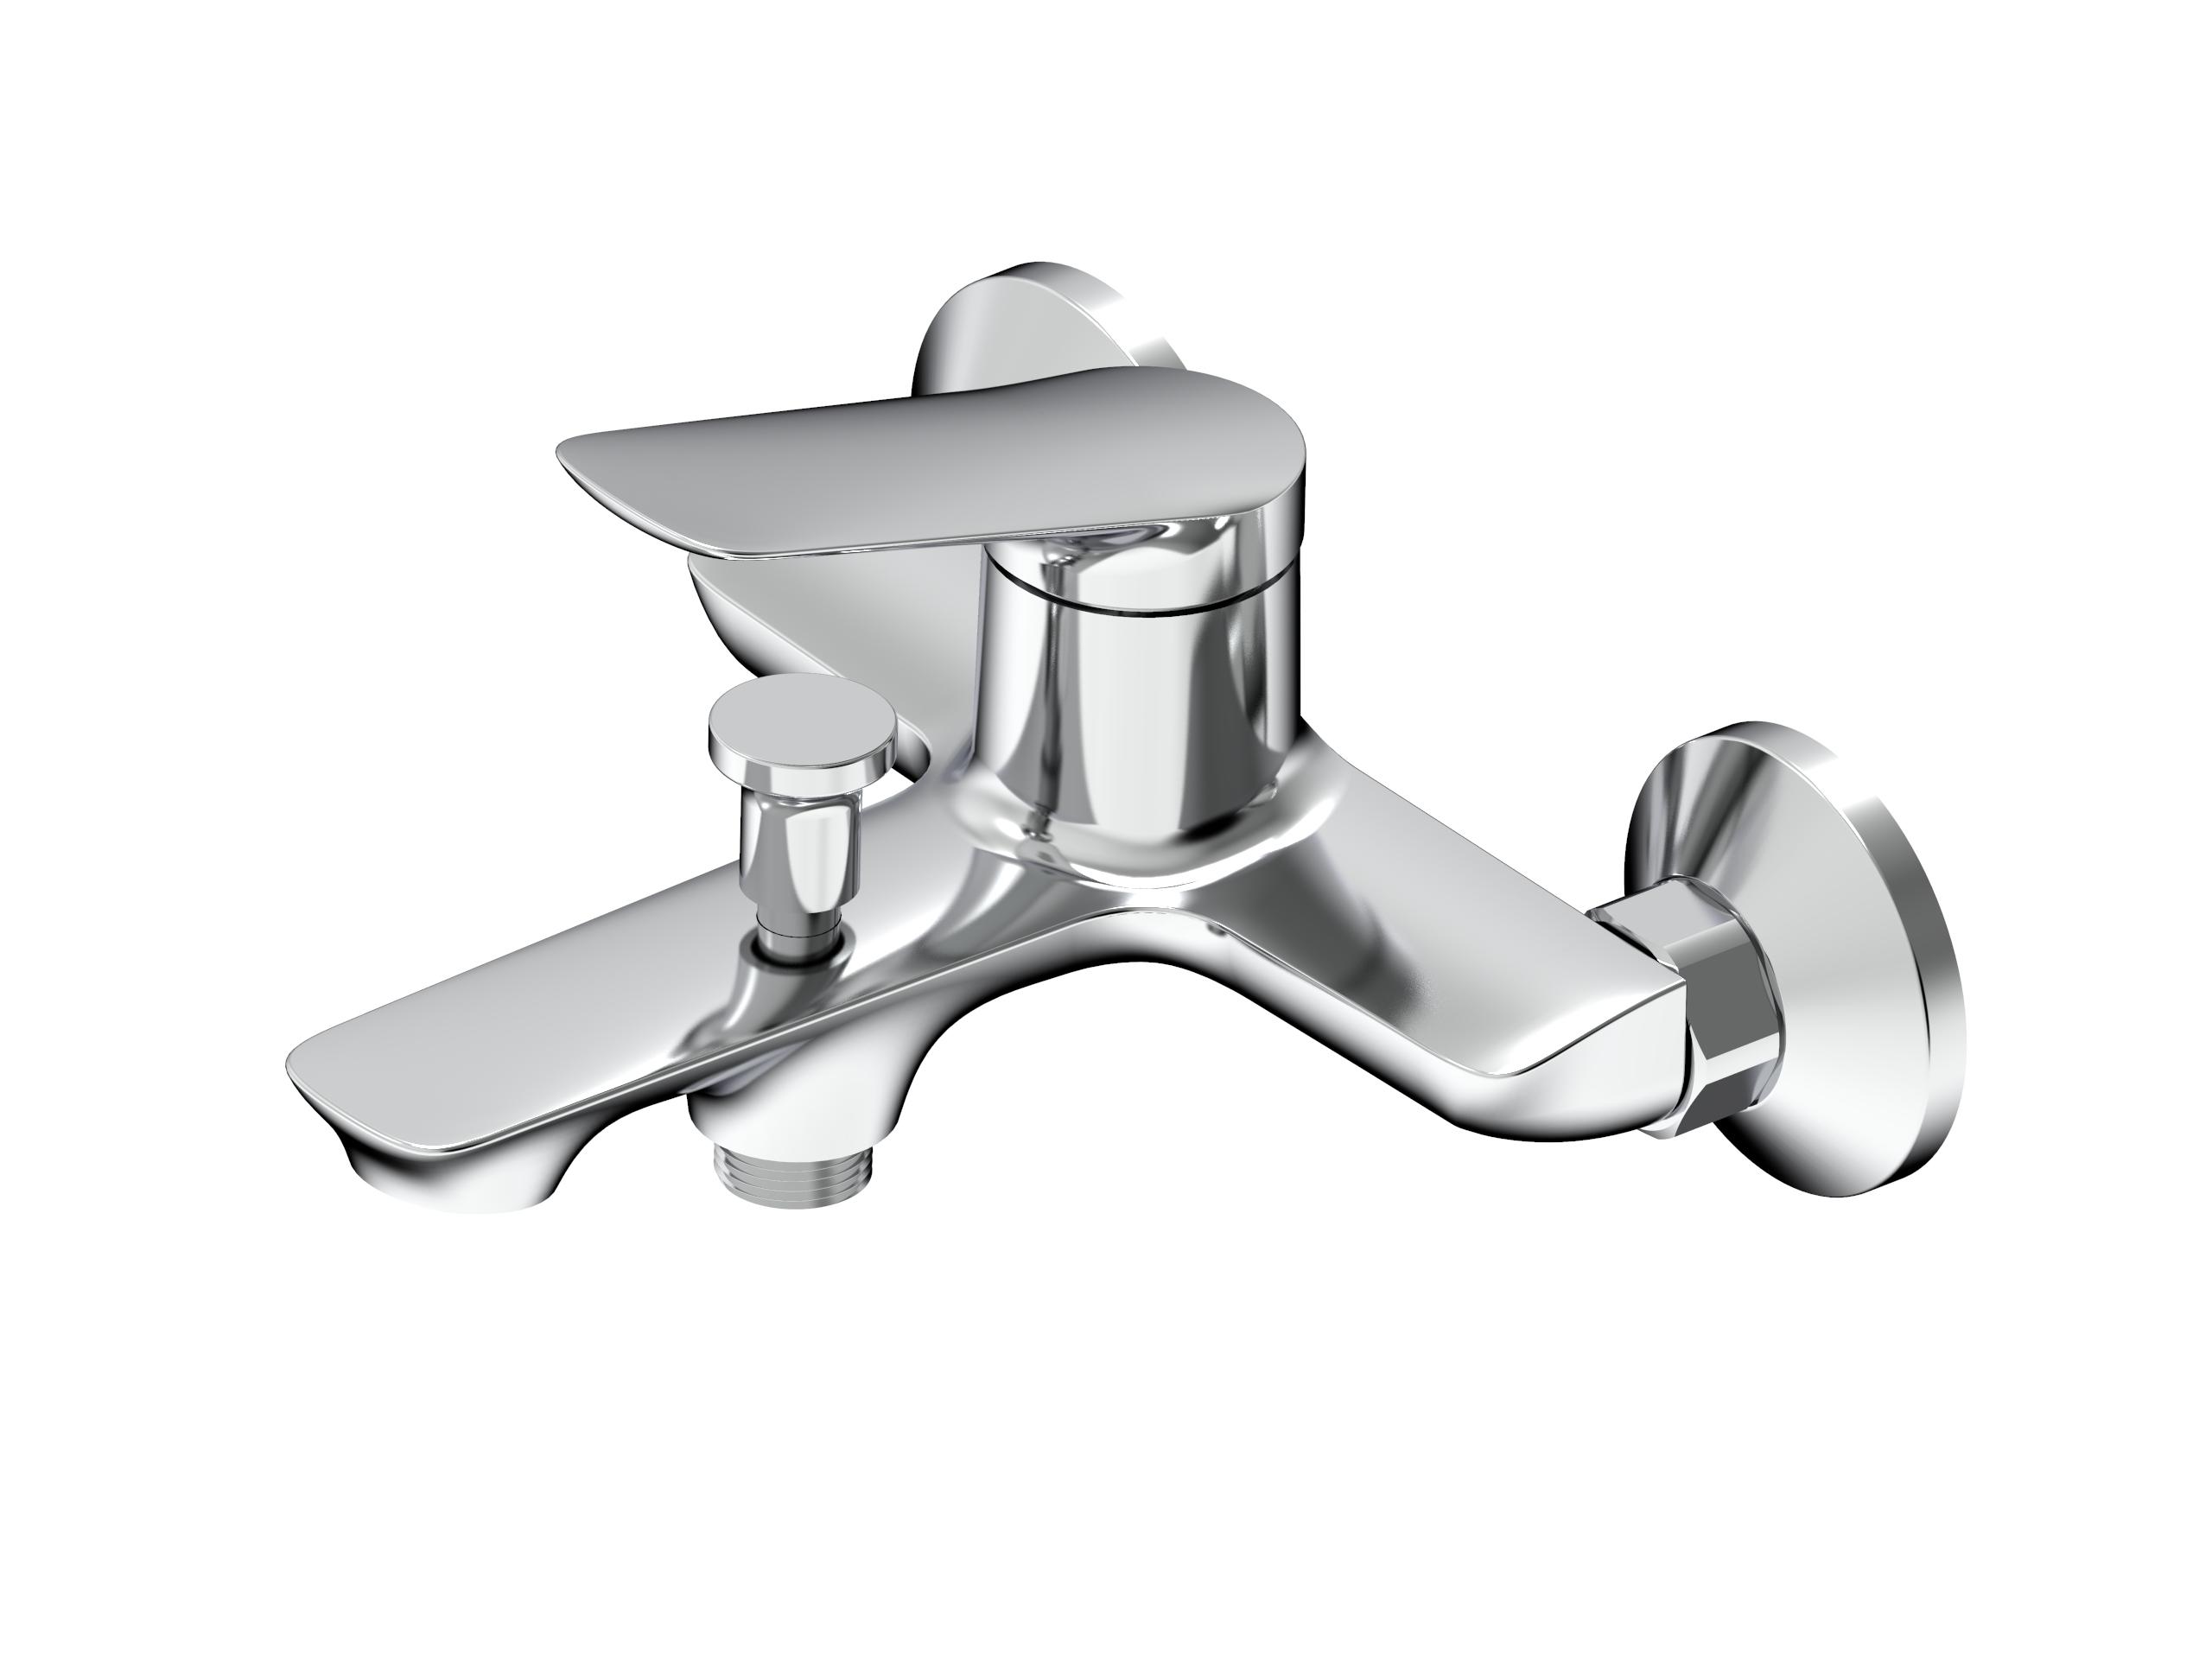 What are the key features to consider when selecting a brass basin faucet for my bathroom sink?